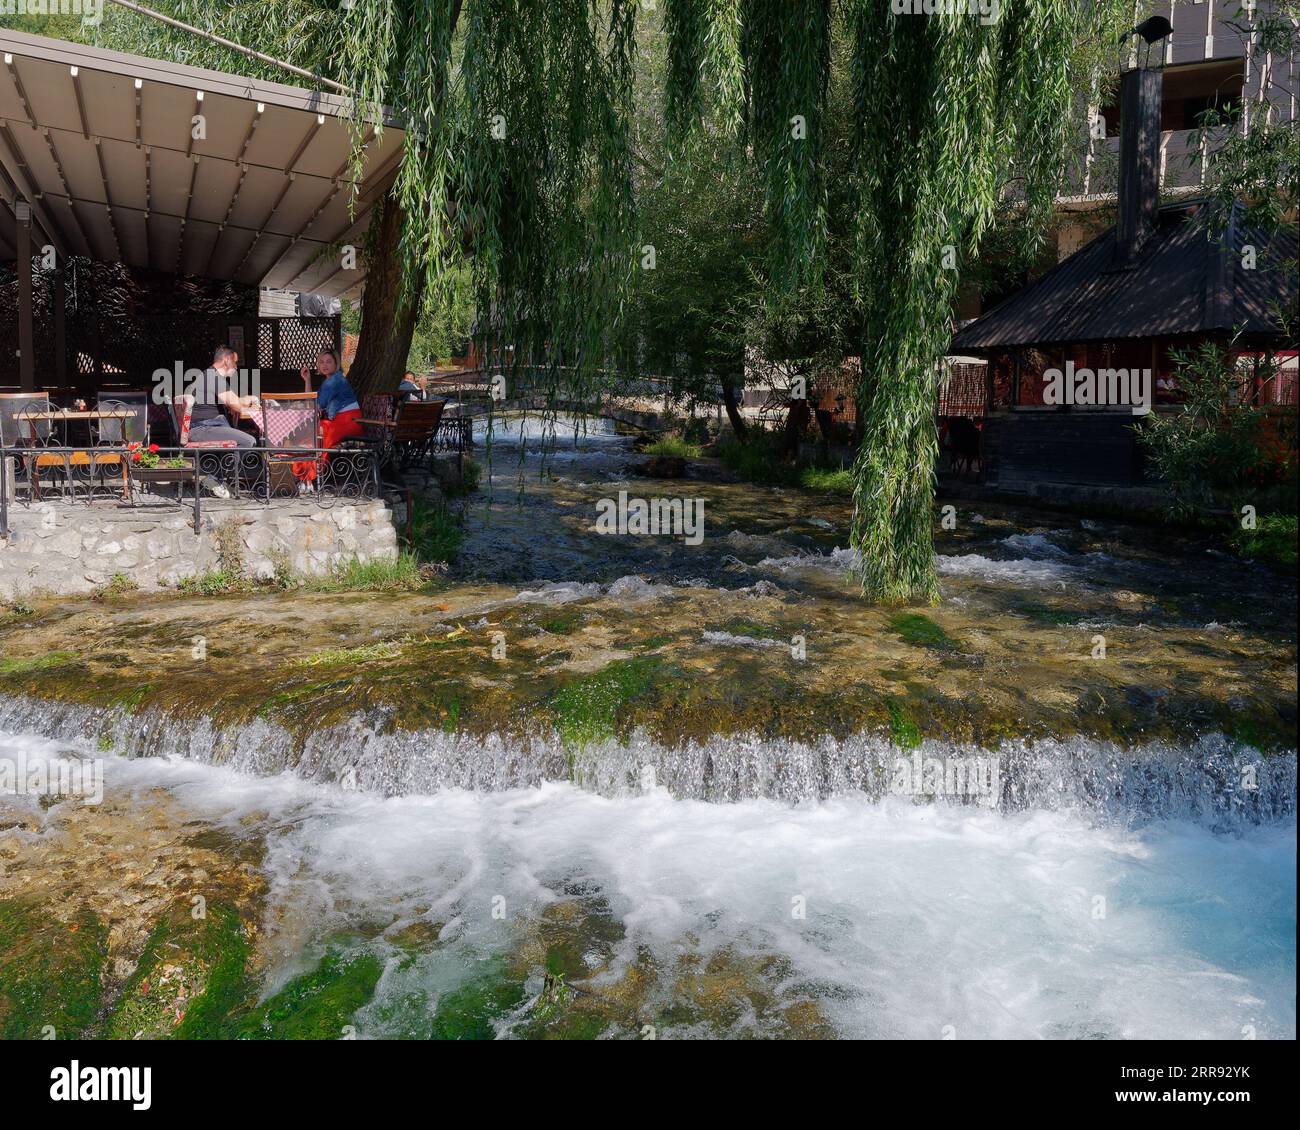 People sit at a cafe/restaurant beside a stream in the town of Travnik, Bosnia and Herzegovina, September 06, 2023 Stock Photo